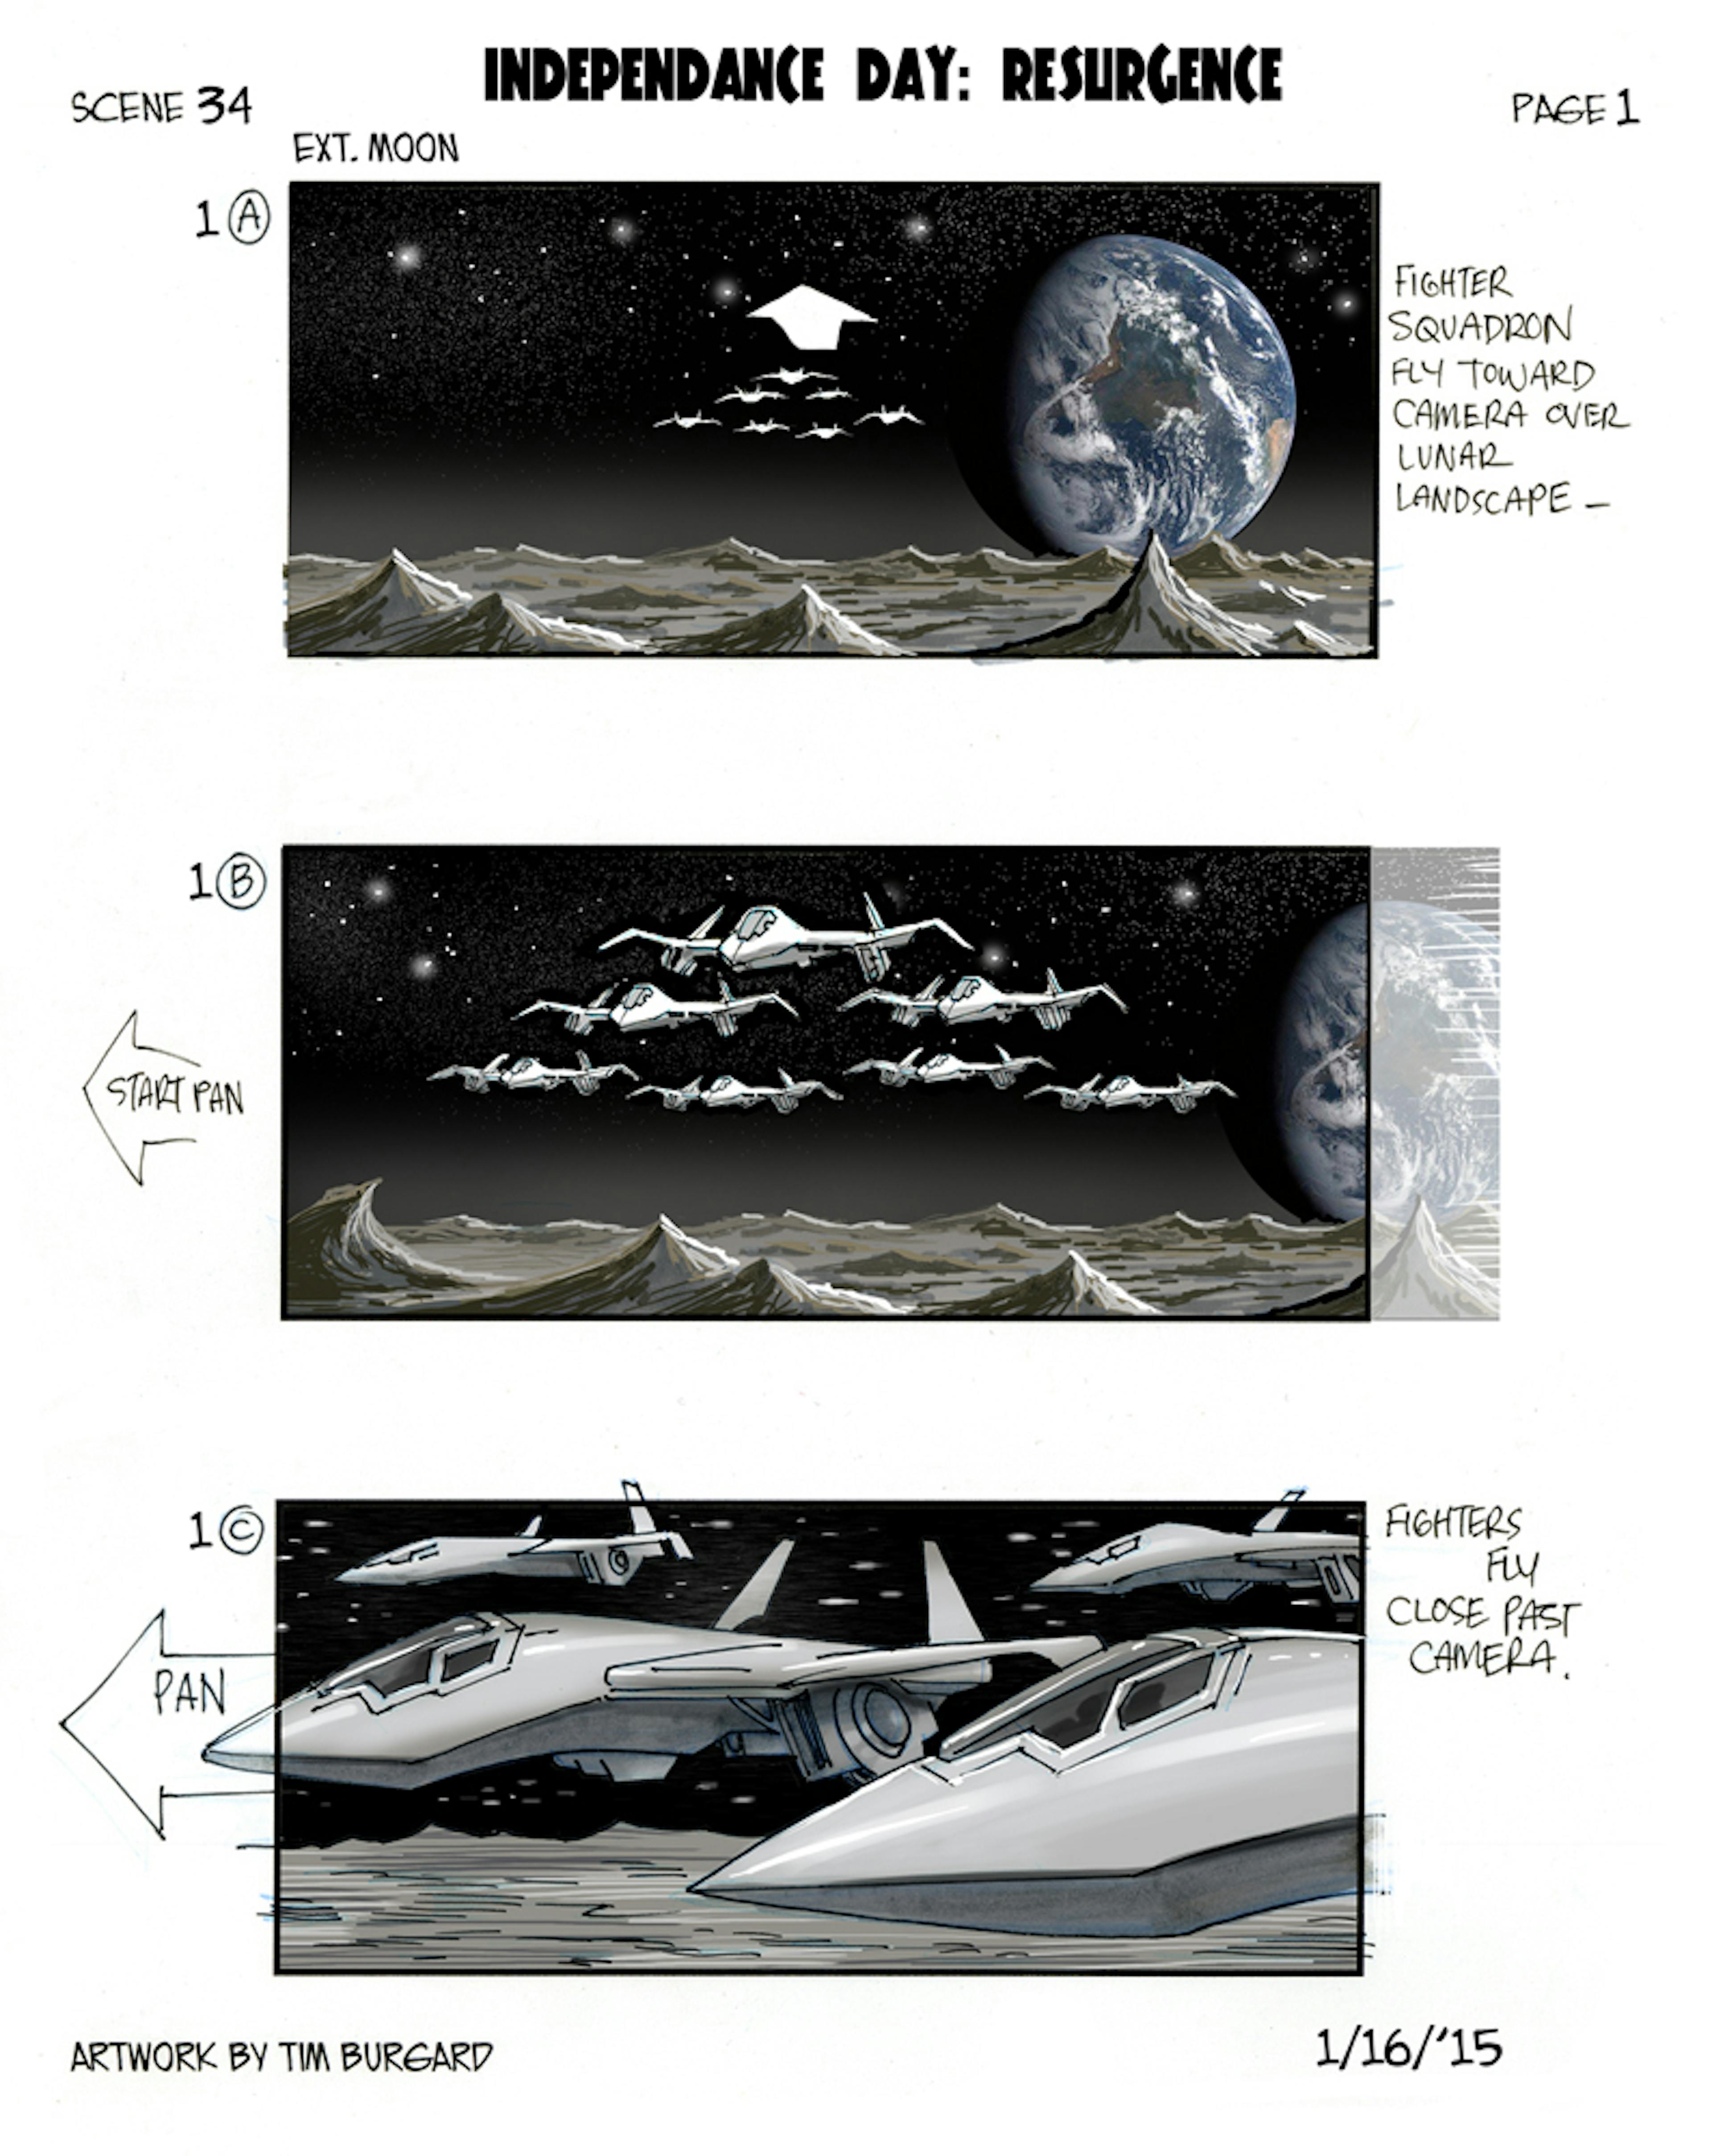 Storyboards from Independence Day: Resurgance